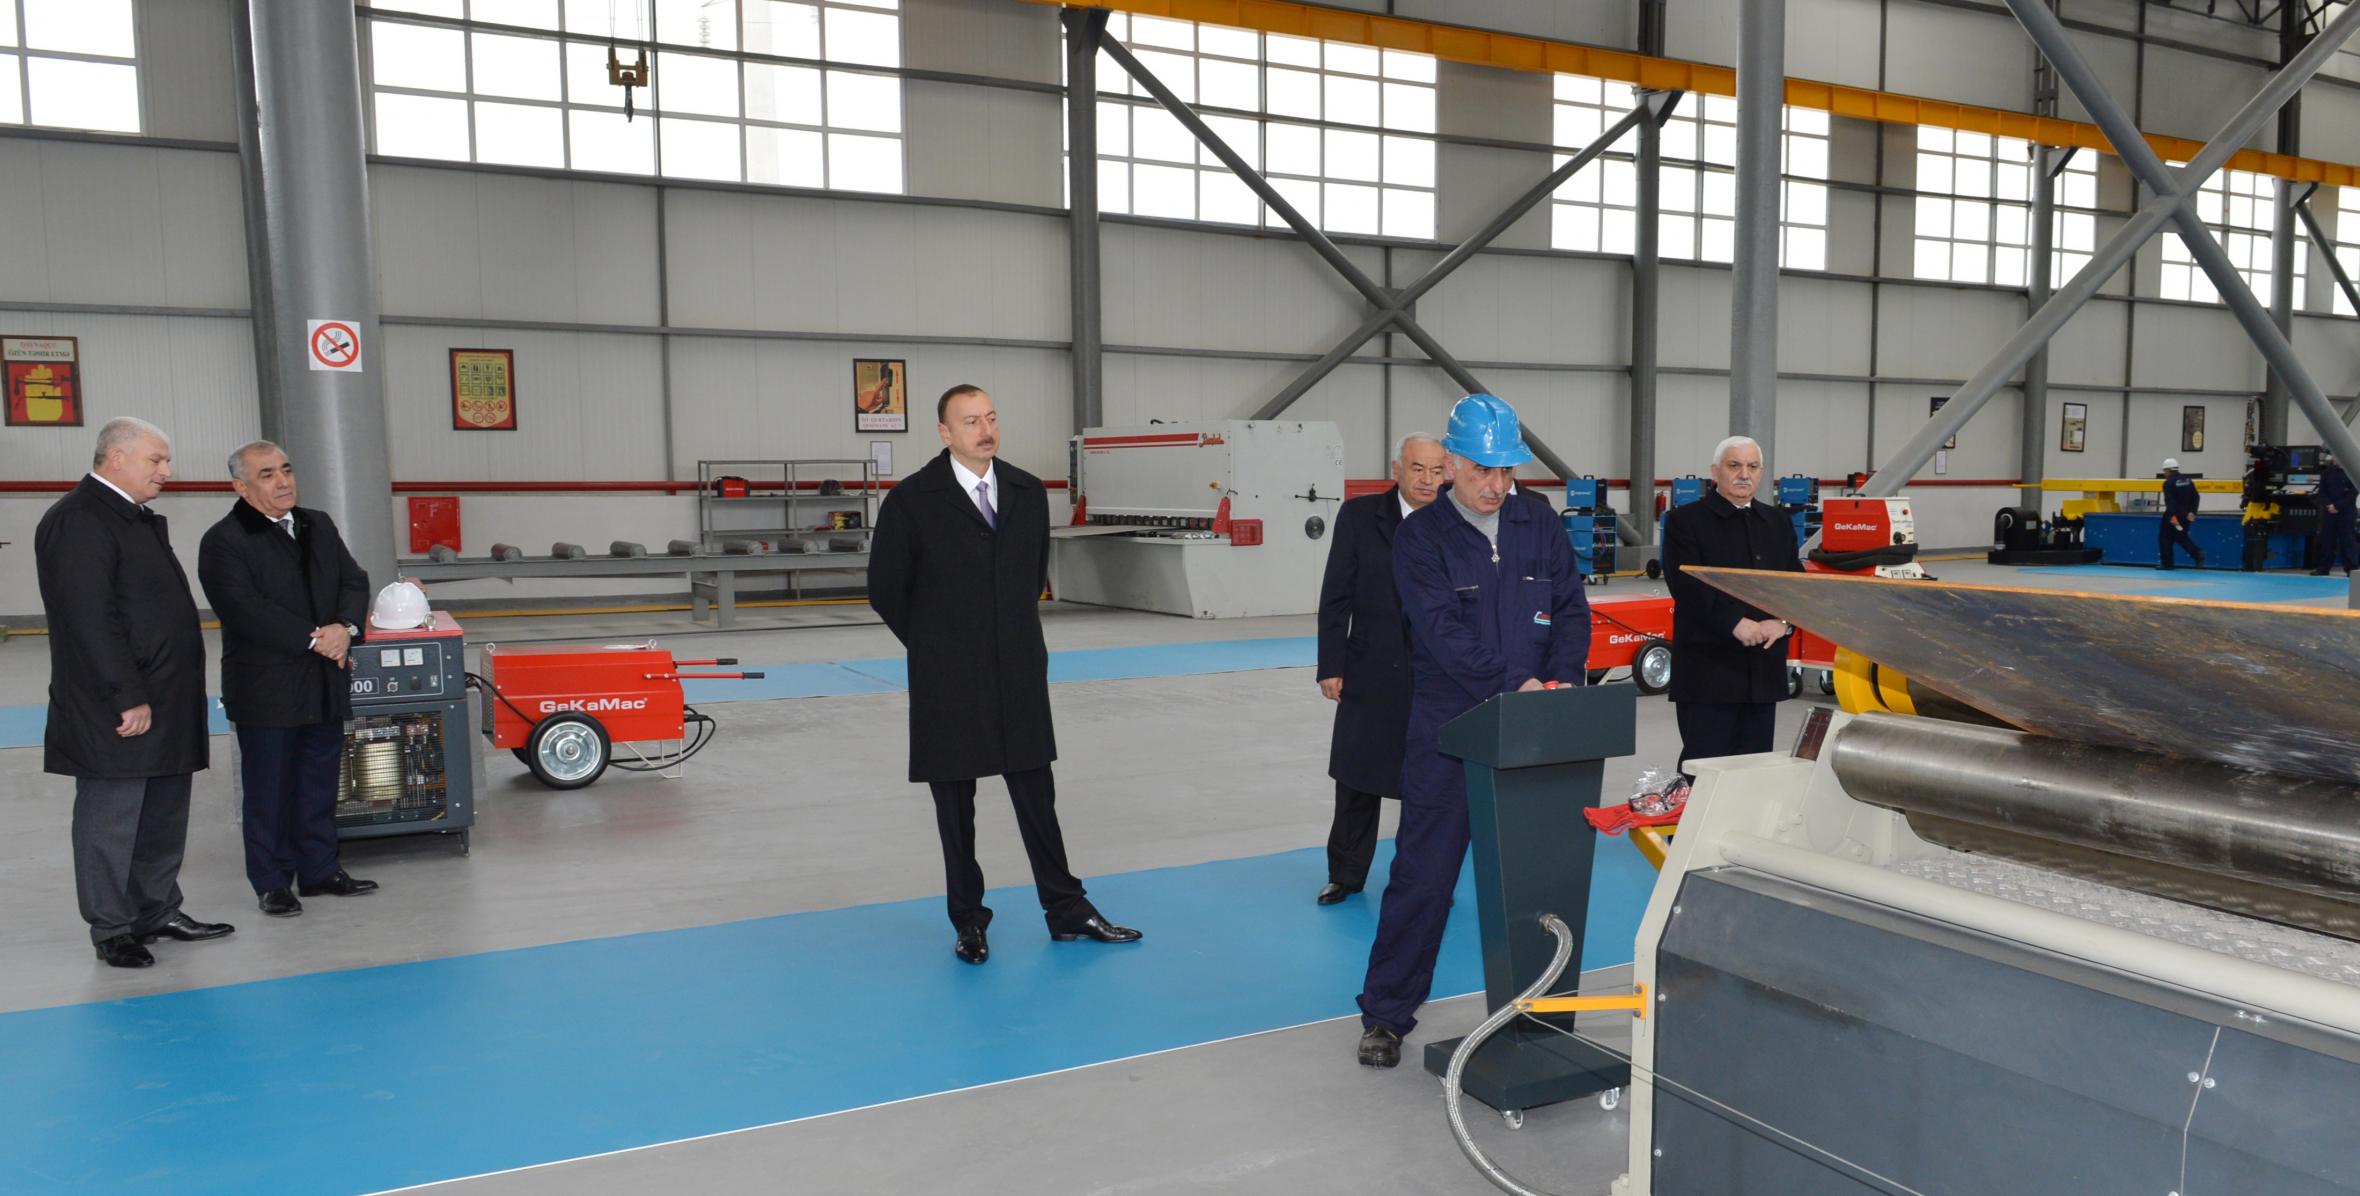 Ilham Aliyev attended the opening of a new “Ship repair and ship building” production unit of the Azerbaijan State Caspian Shipping Company